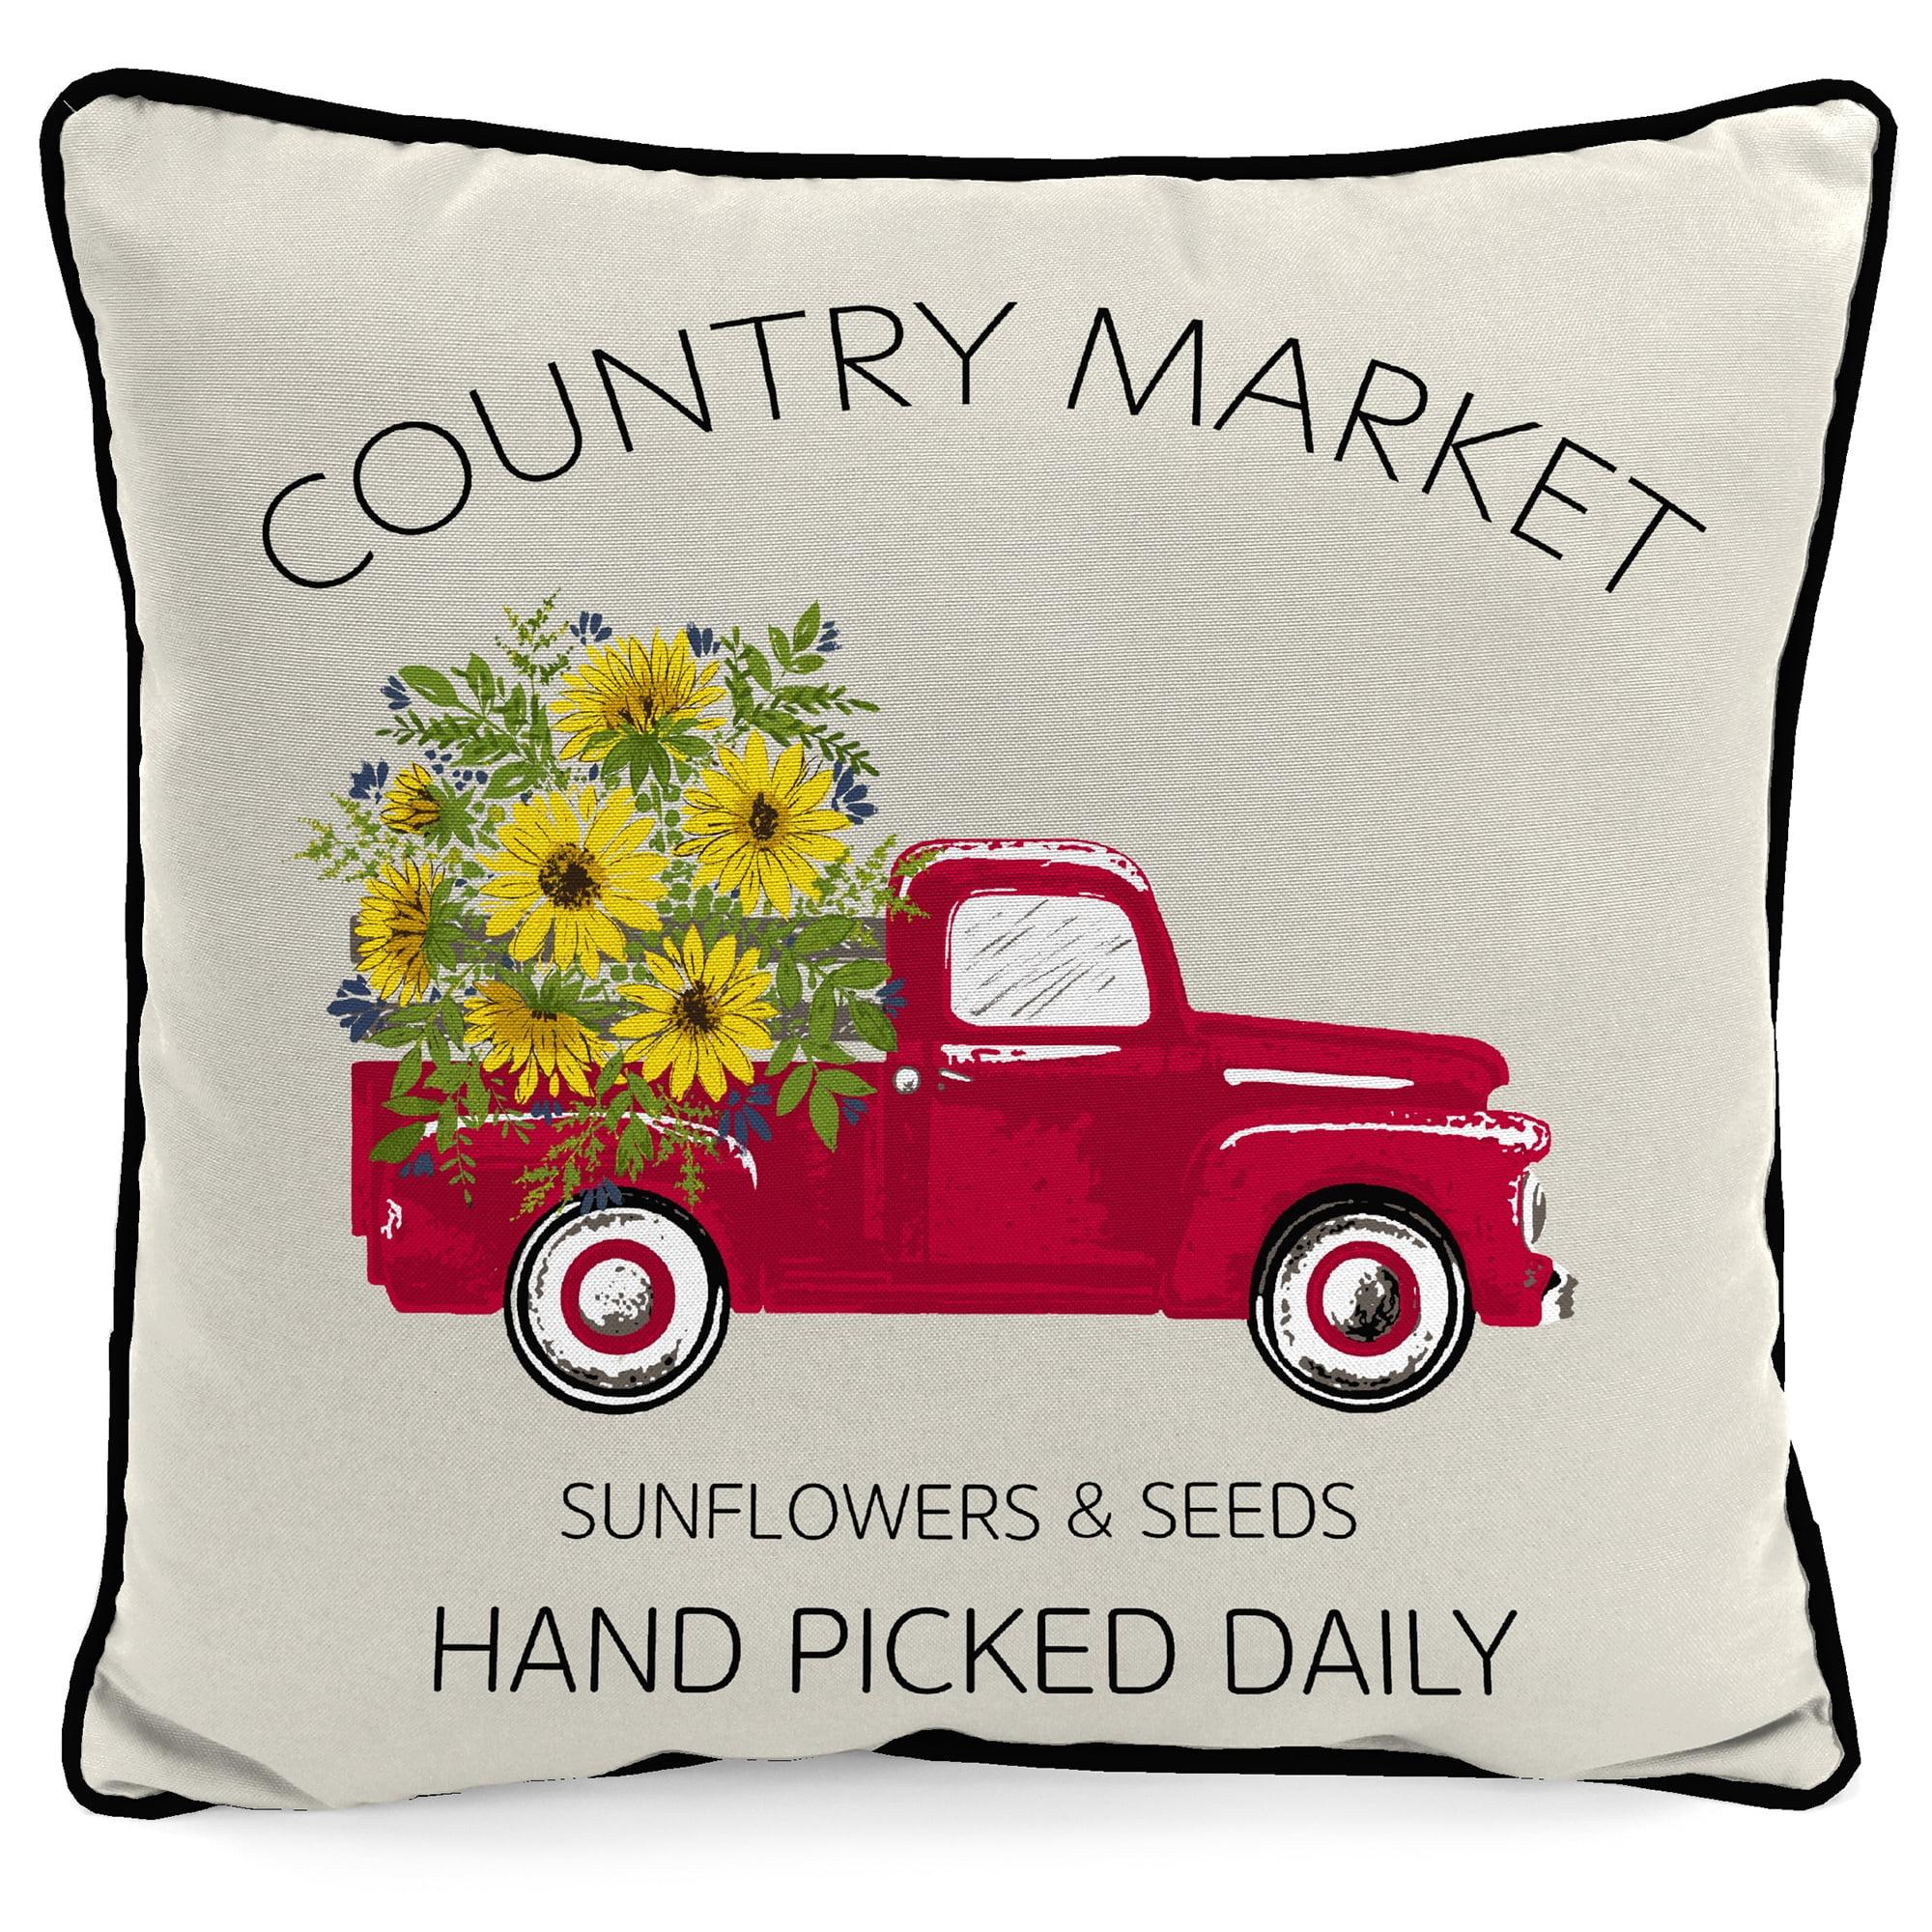 Mainstays Country Market Flower Truck Reversible Outdoor Throw Pillow, 16", Beige Novelty and Plaid